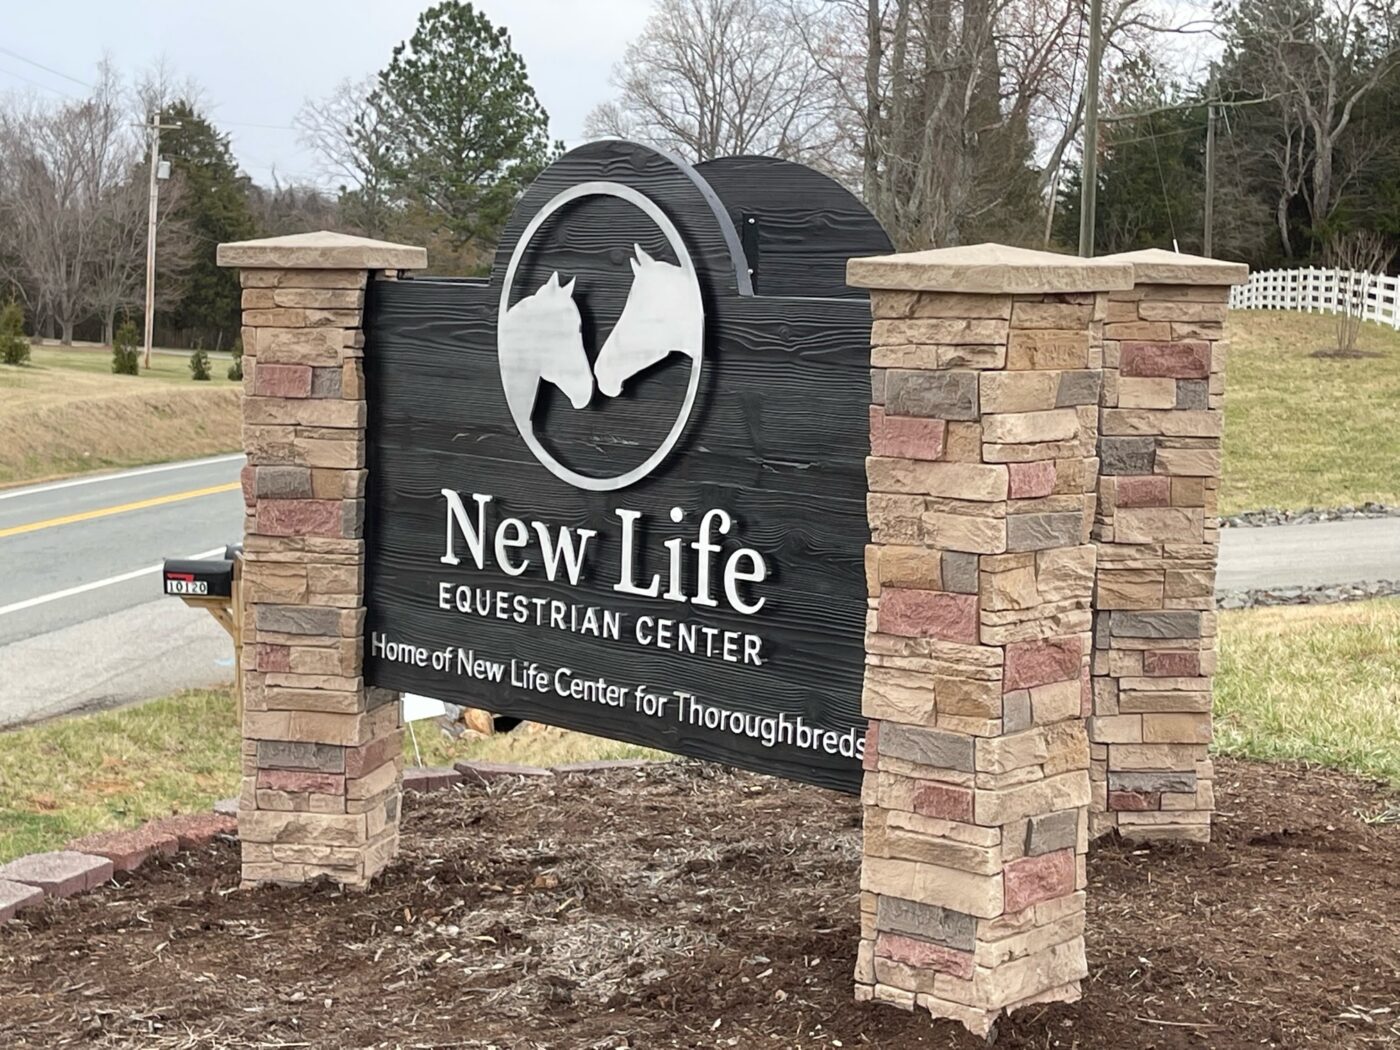 After faux stone commercial sign